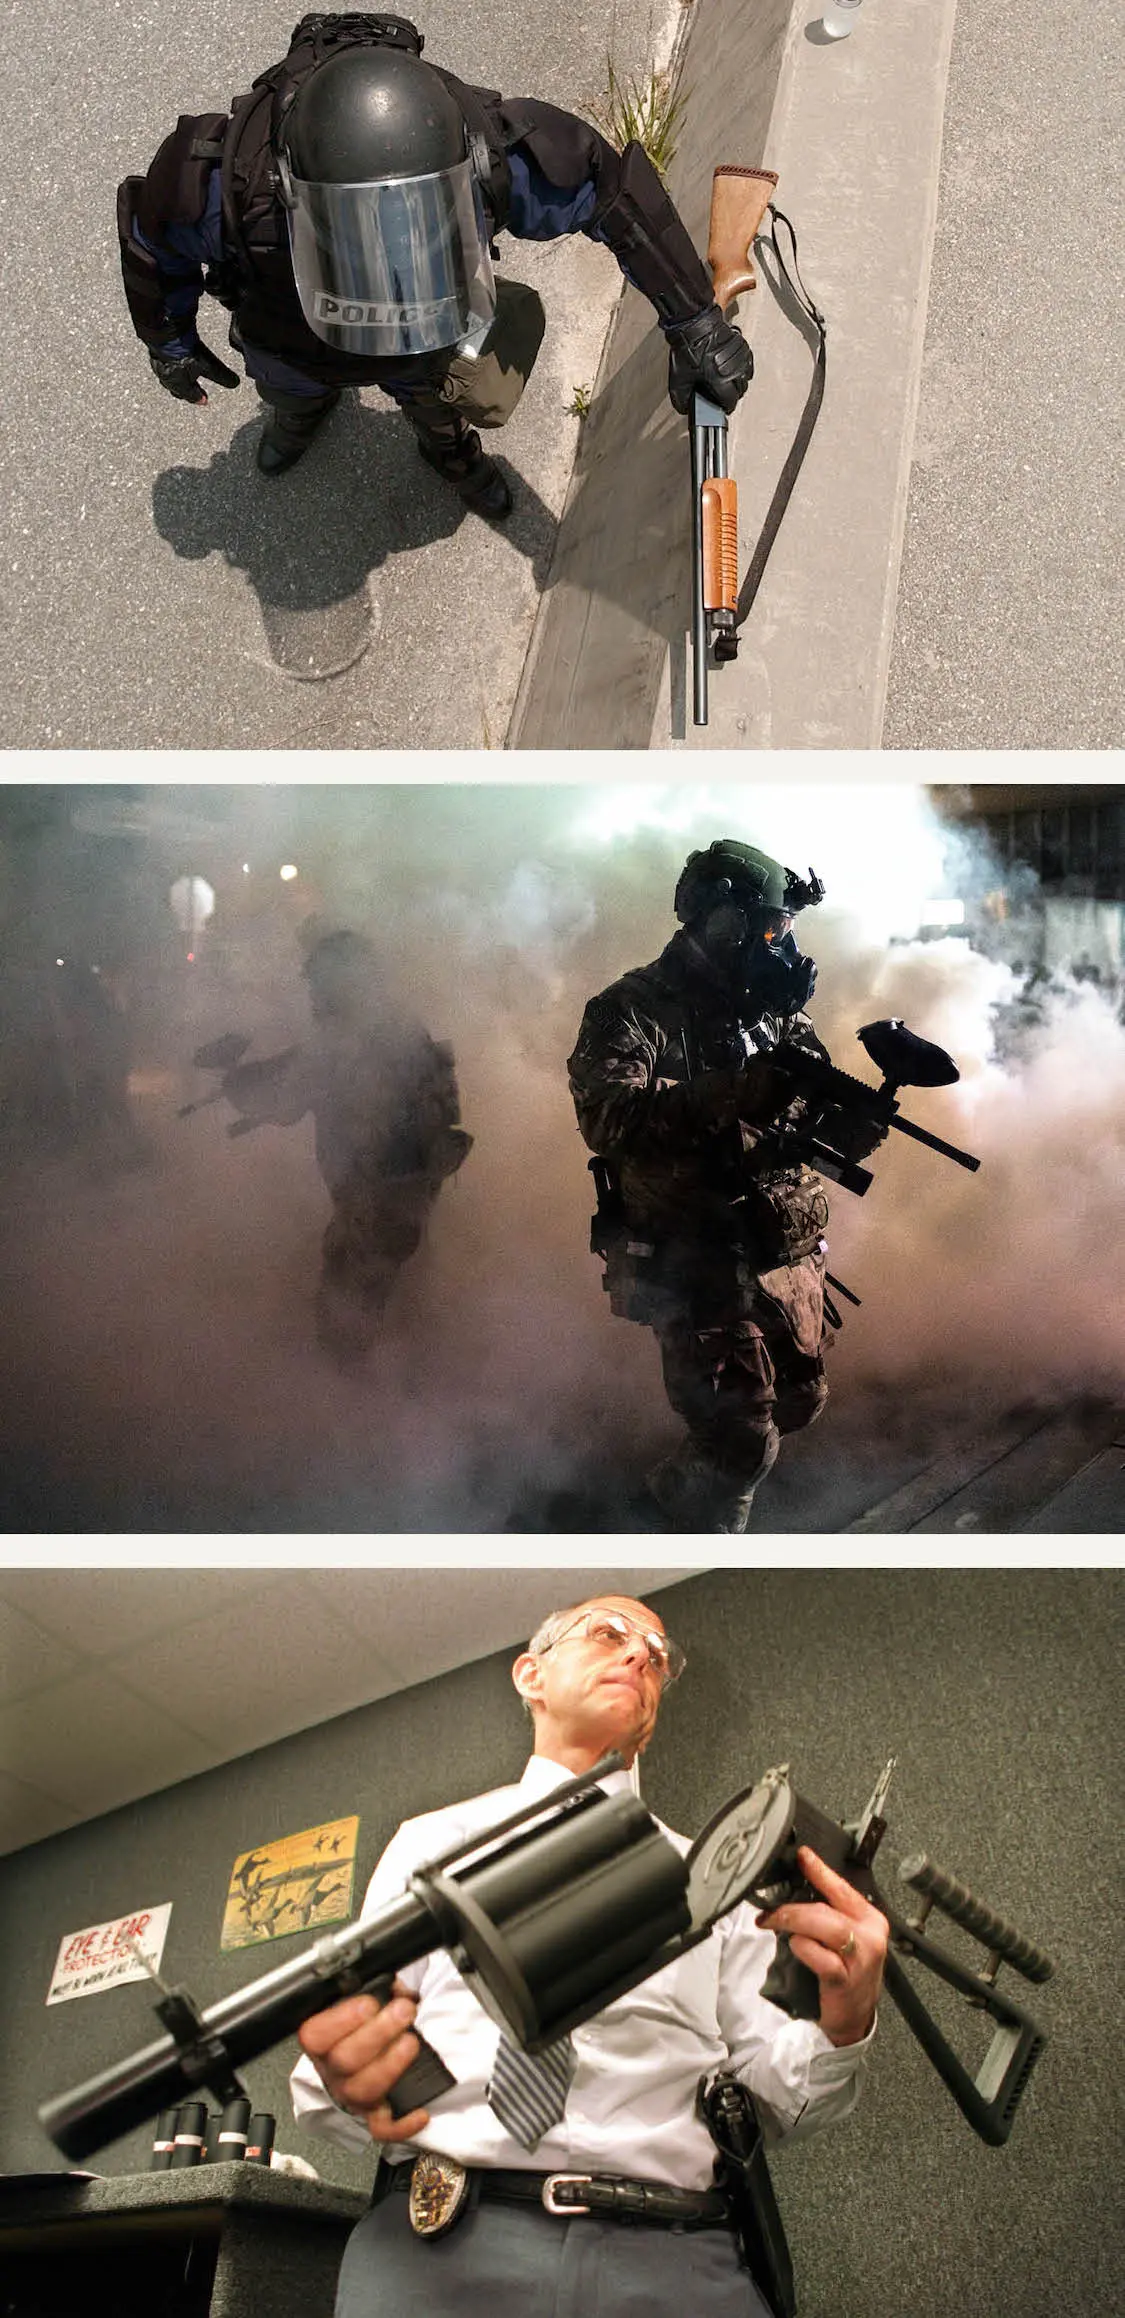 Three images, from top: A helmeted officer holds a shotgun, an armored officer carries an air rifle amidst smoke, and a man shows of a high-powered launcher.